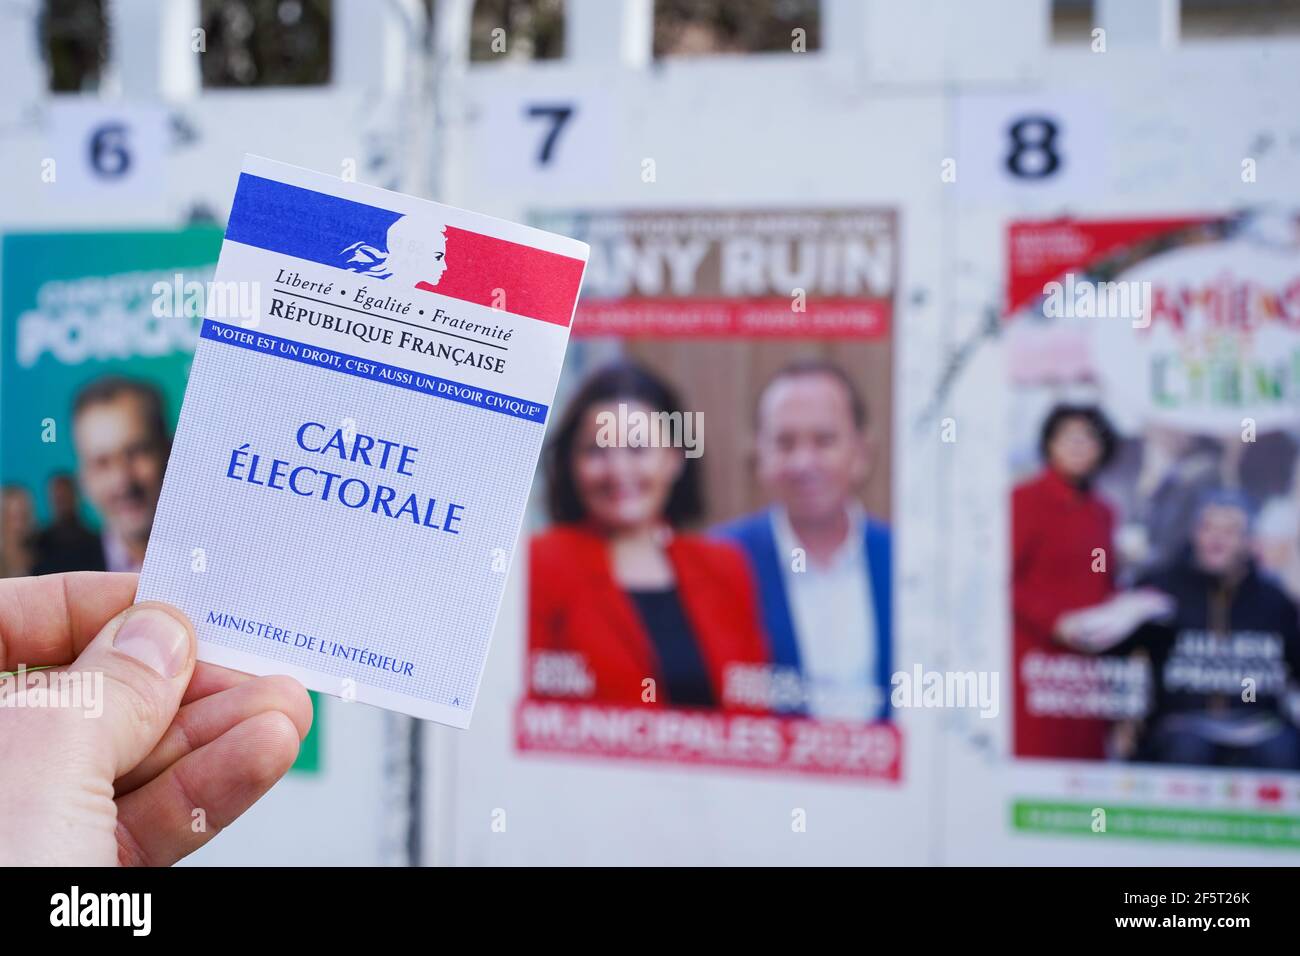 AMIENS, FRANCE - MARCH 15, 2020 : electoral posters for french local elections and voter card. Stock Photo